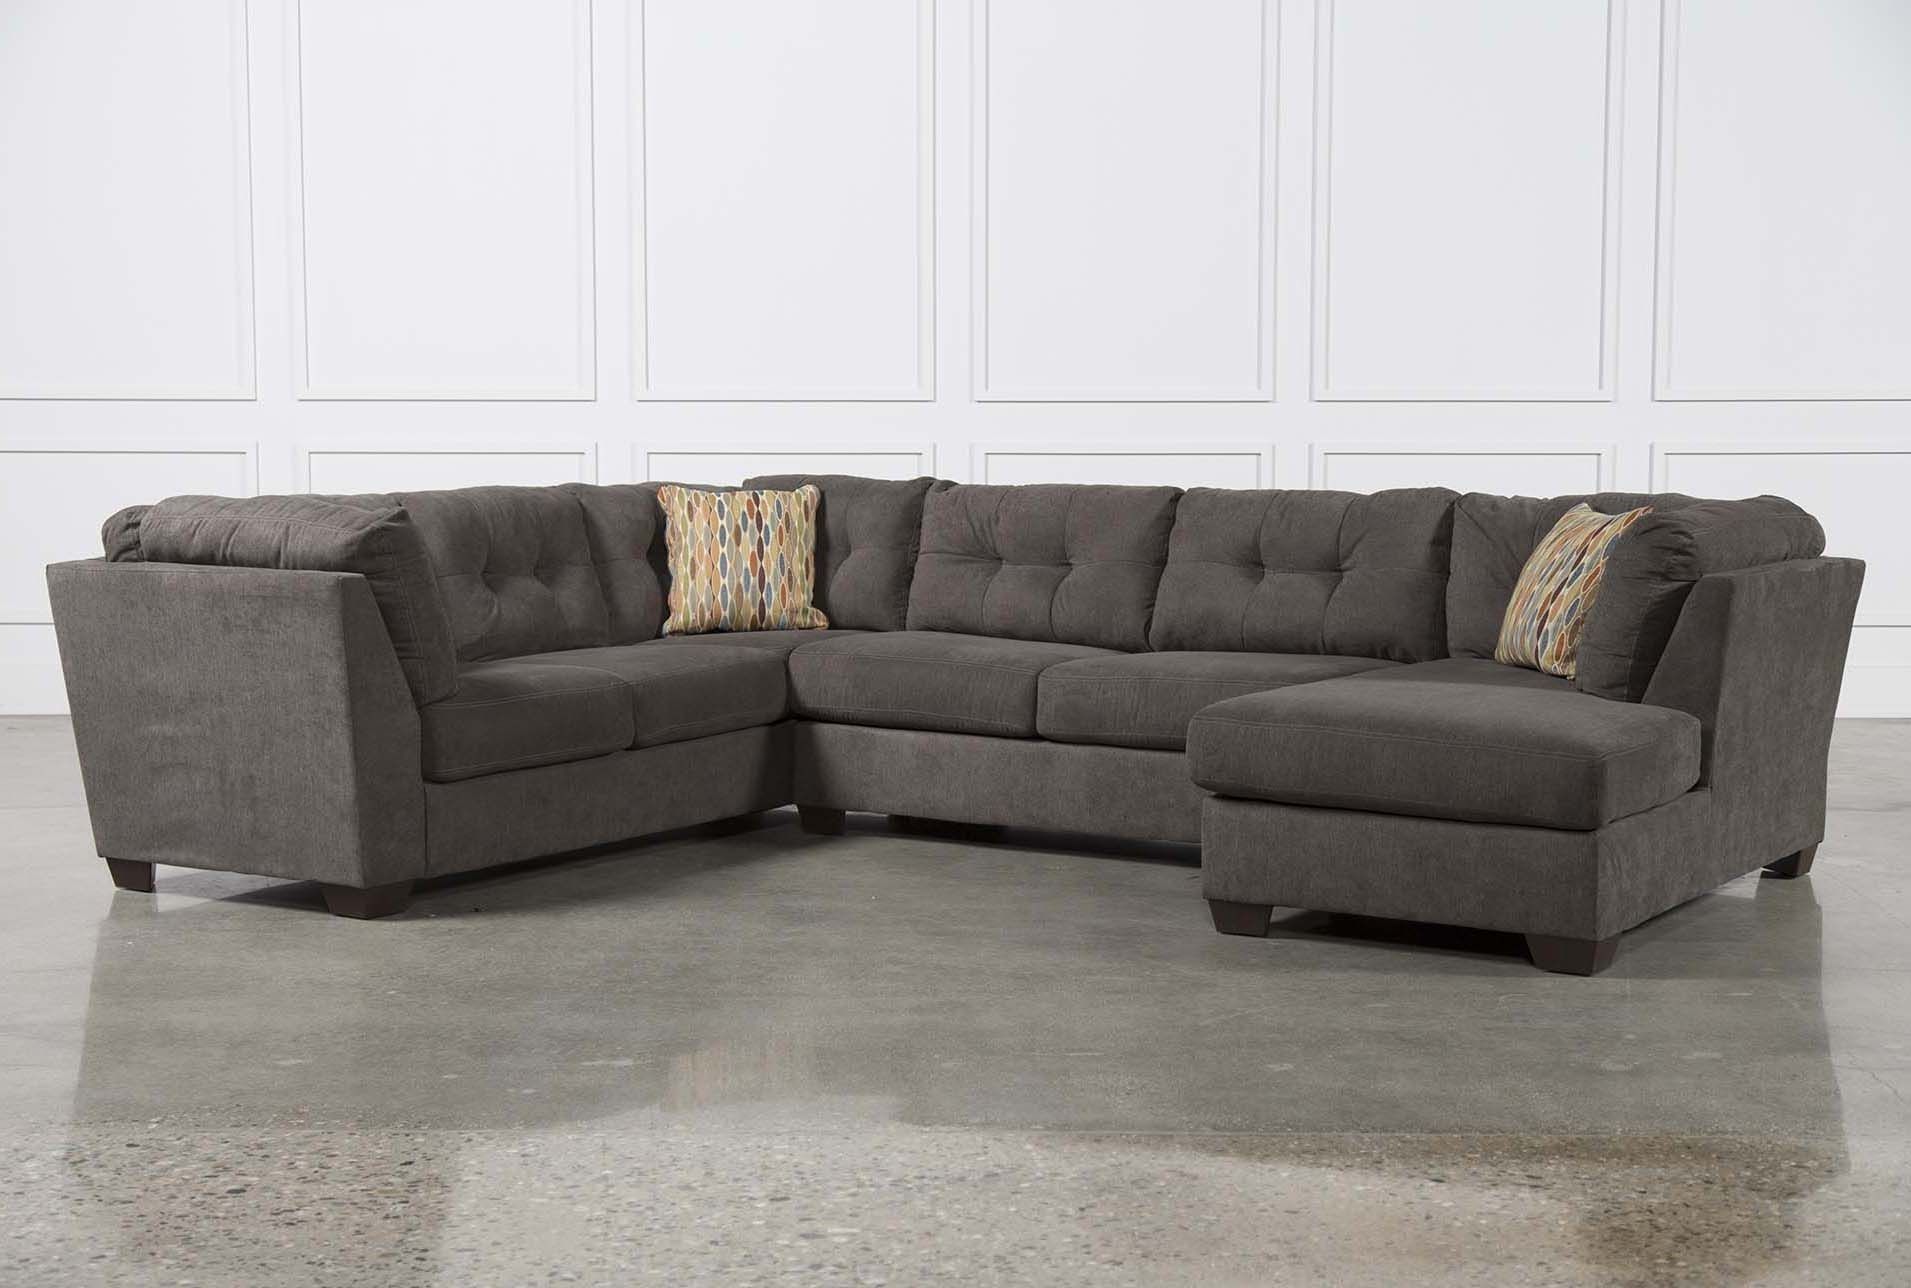 Norfolk Grey 3 Piece Sectional W/laf Chaise Pertaining To Norfolk Grey 3 Piece Sectionals With Raf Chaise (View 3 of 25)